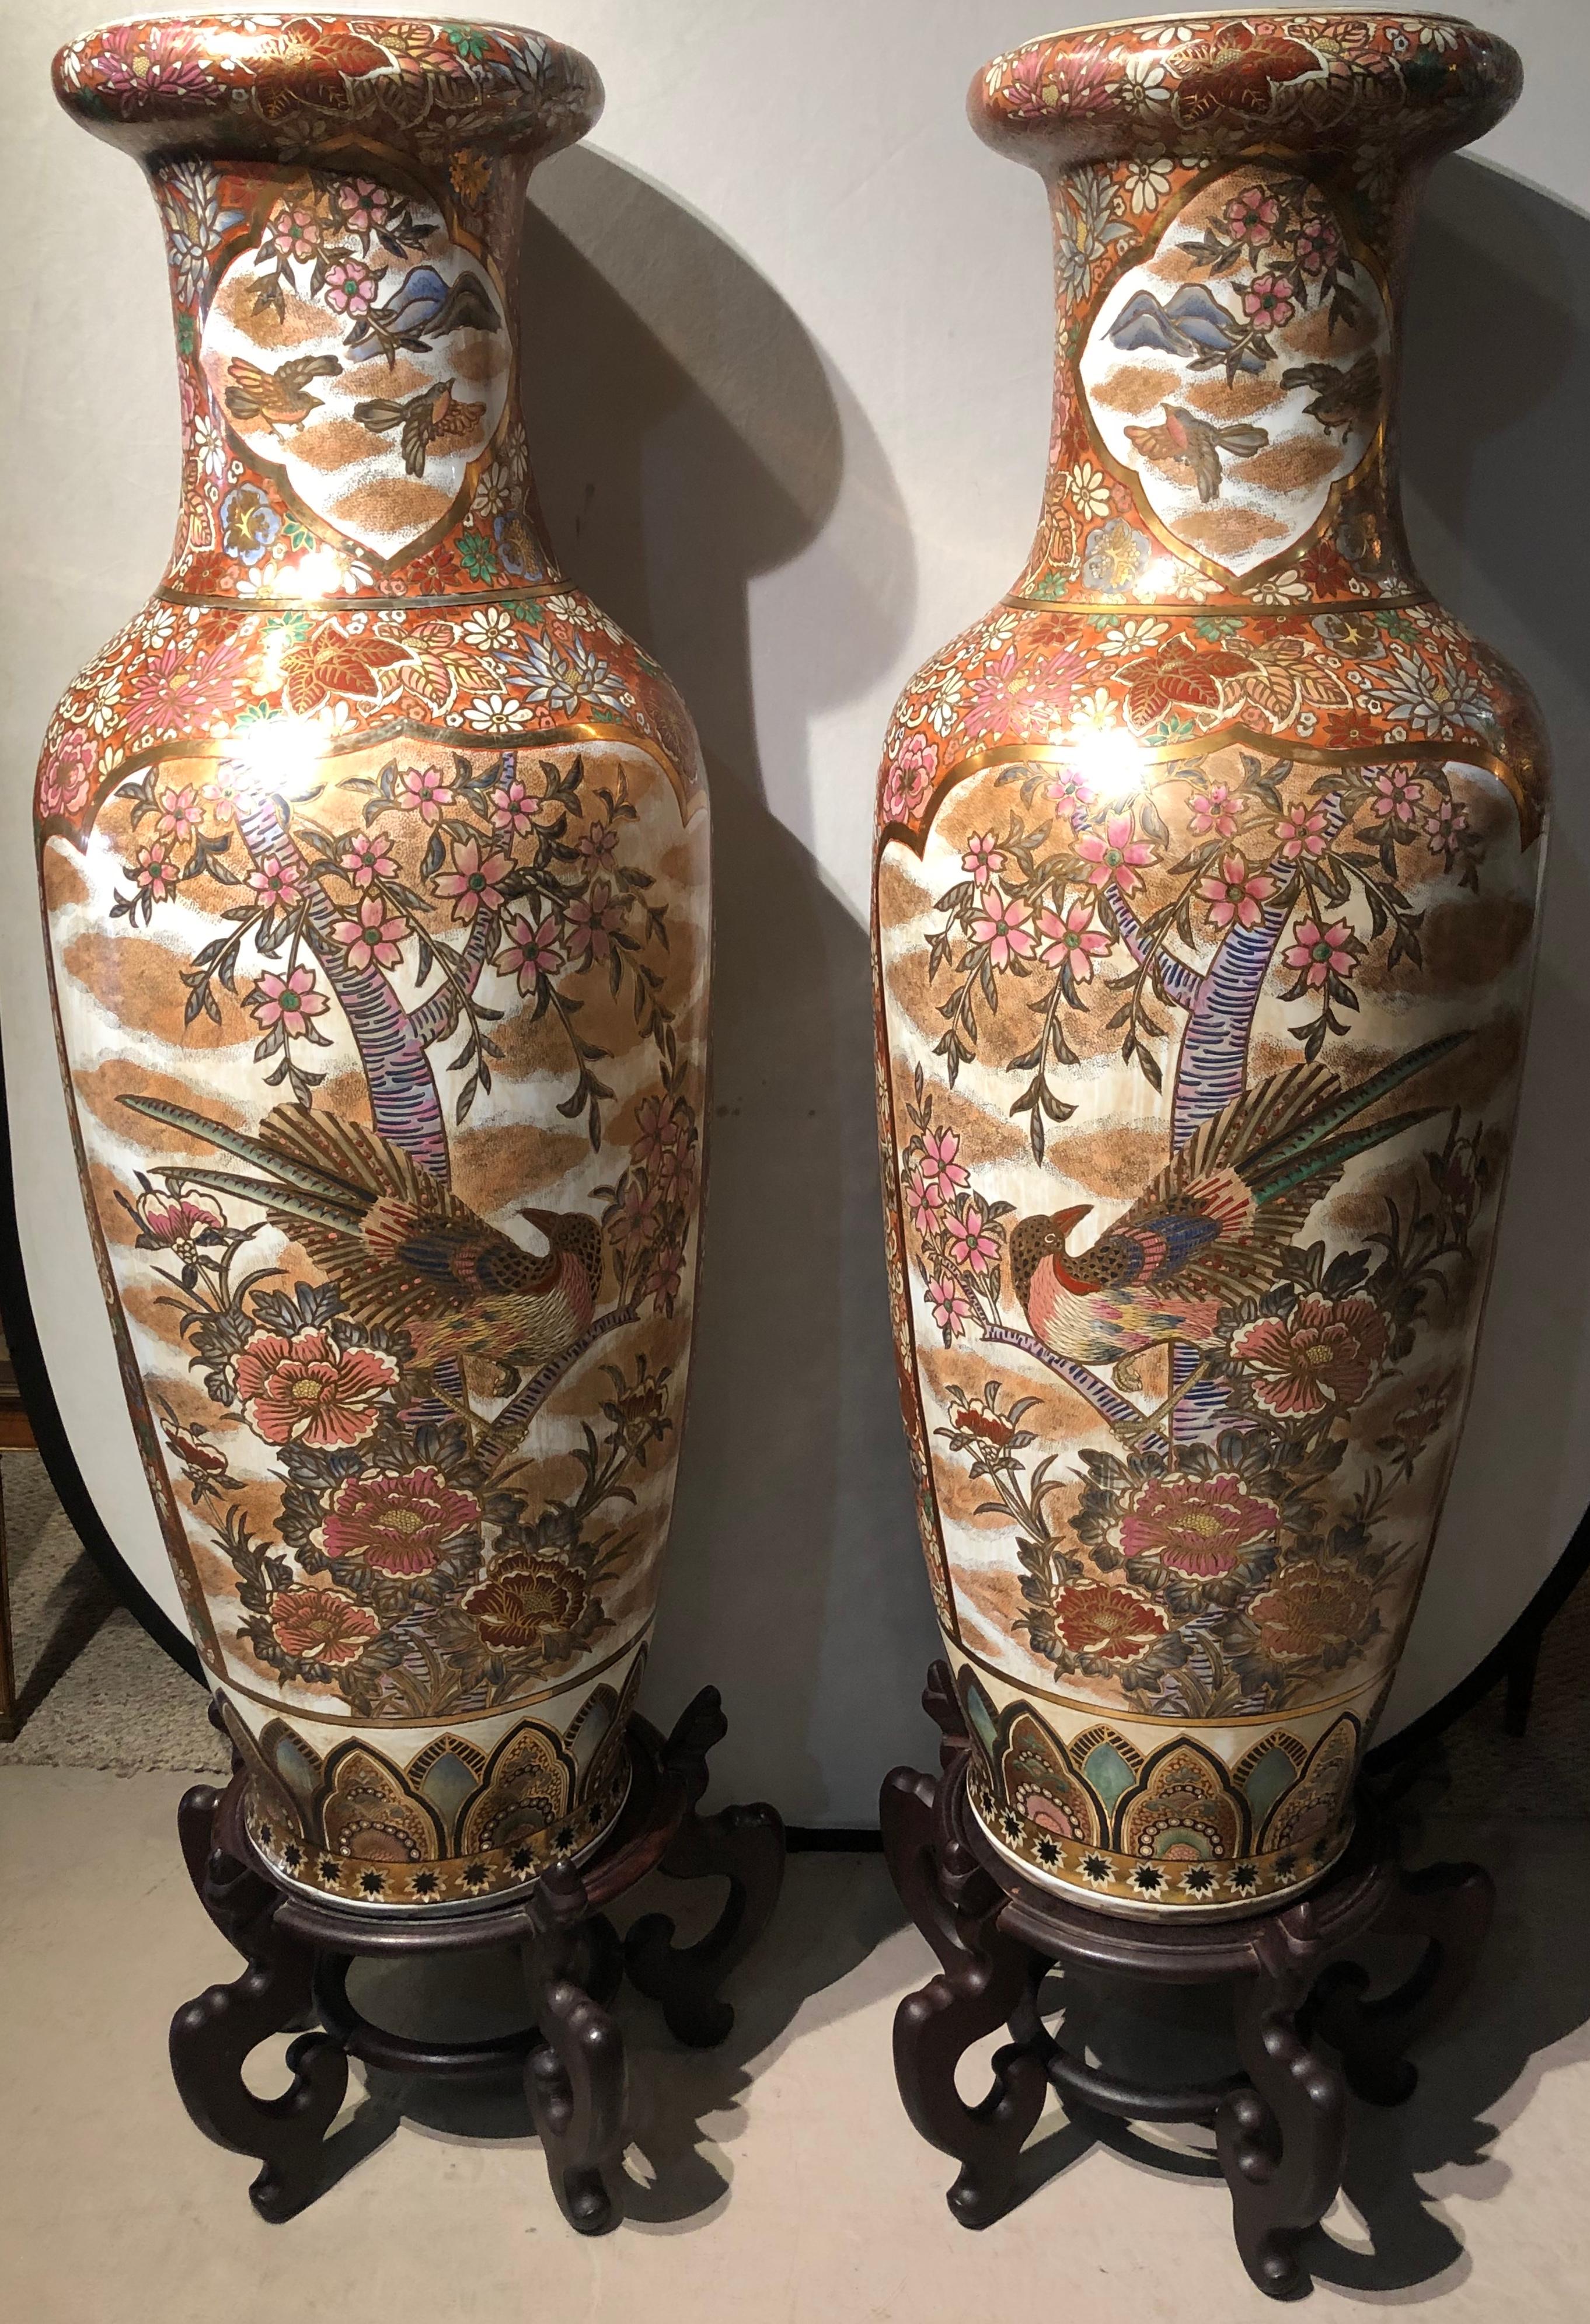 Pair of Chinese Palatial vases or urns on sleek and simple teak pedestals each having opposing bird decorations with fine gilt and floral design. Each with a signed base.